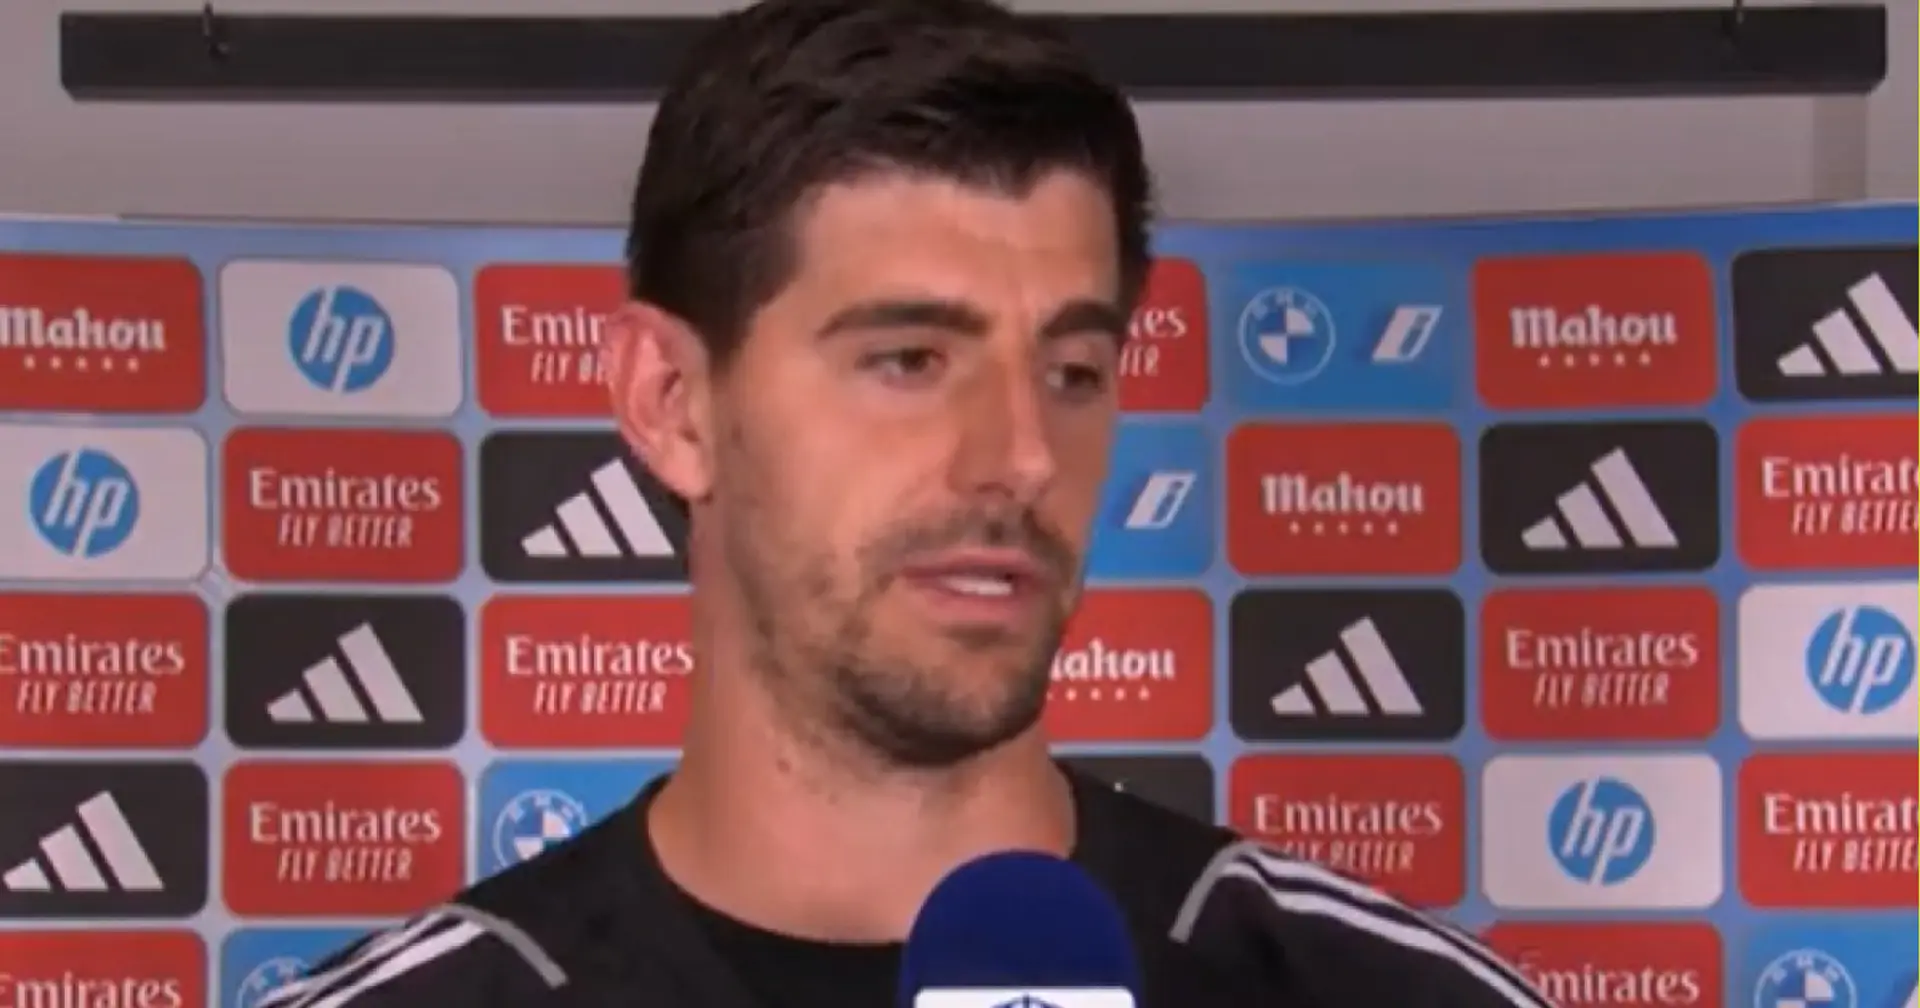 Courtois ends debate on who should play Champions League final with performance v Alaves